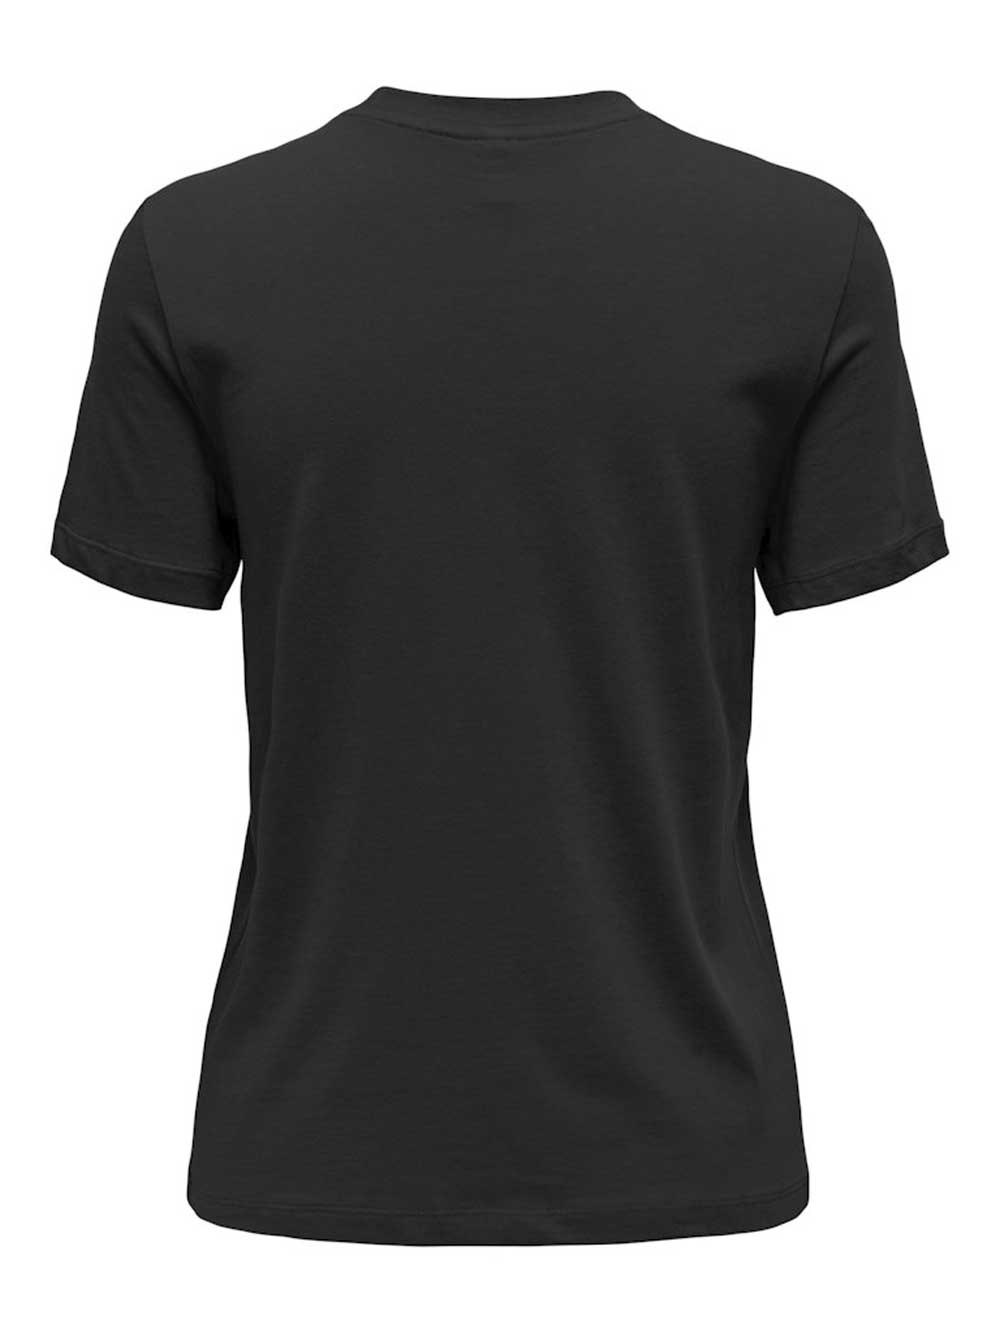 ONLY T-shirts e Tops ONLY da DONNA - nero